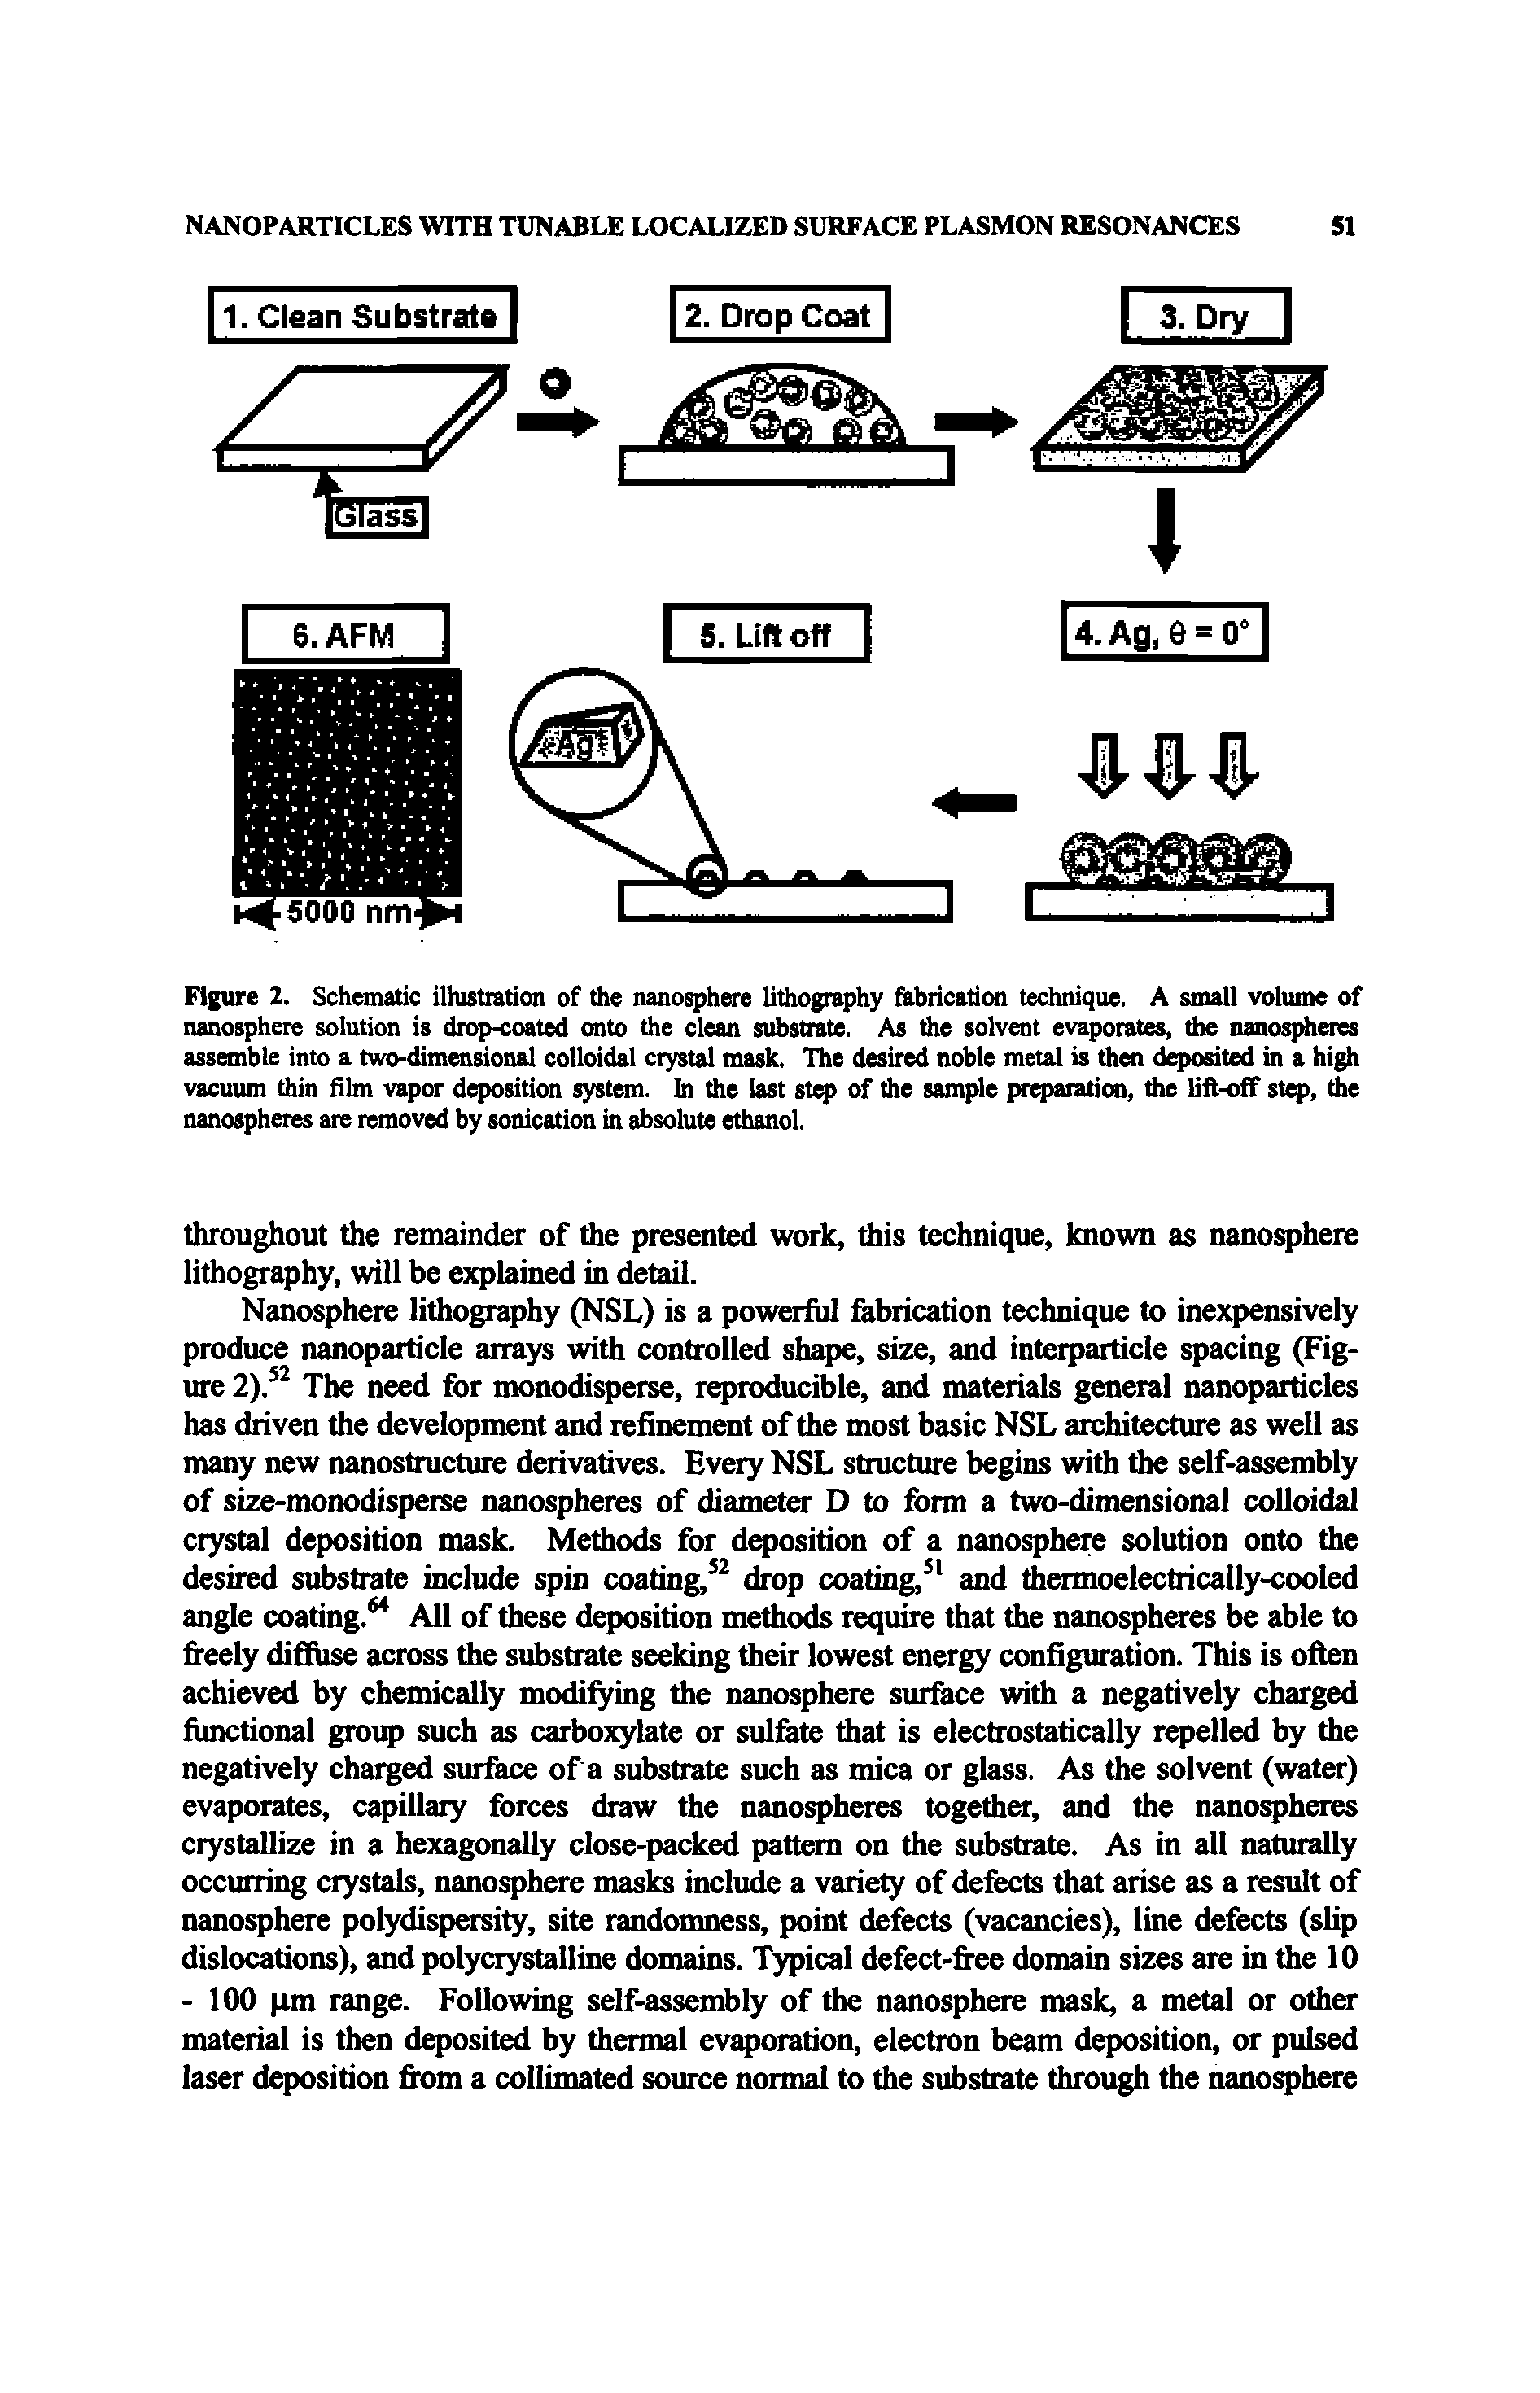 Figure 2. Schematic ilhistiatian of the nanoq)here lithography Cabricatioo technique. A small vohime of nanosphere solution is diop-coated onto the clean substrate. As die solvent evaporates, die nanoqiheres assemble into a two-dimensional colloidal crystal mask. The desired noble metal is then dqpodted in a hi vacuum thin film vapor deposition tem. In the last step of the sam de prqnratioii, the lift-off step, the nanospheres are removed by sonication in absolute ethanol.